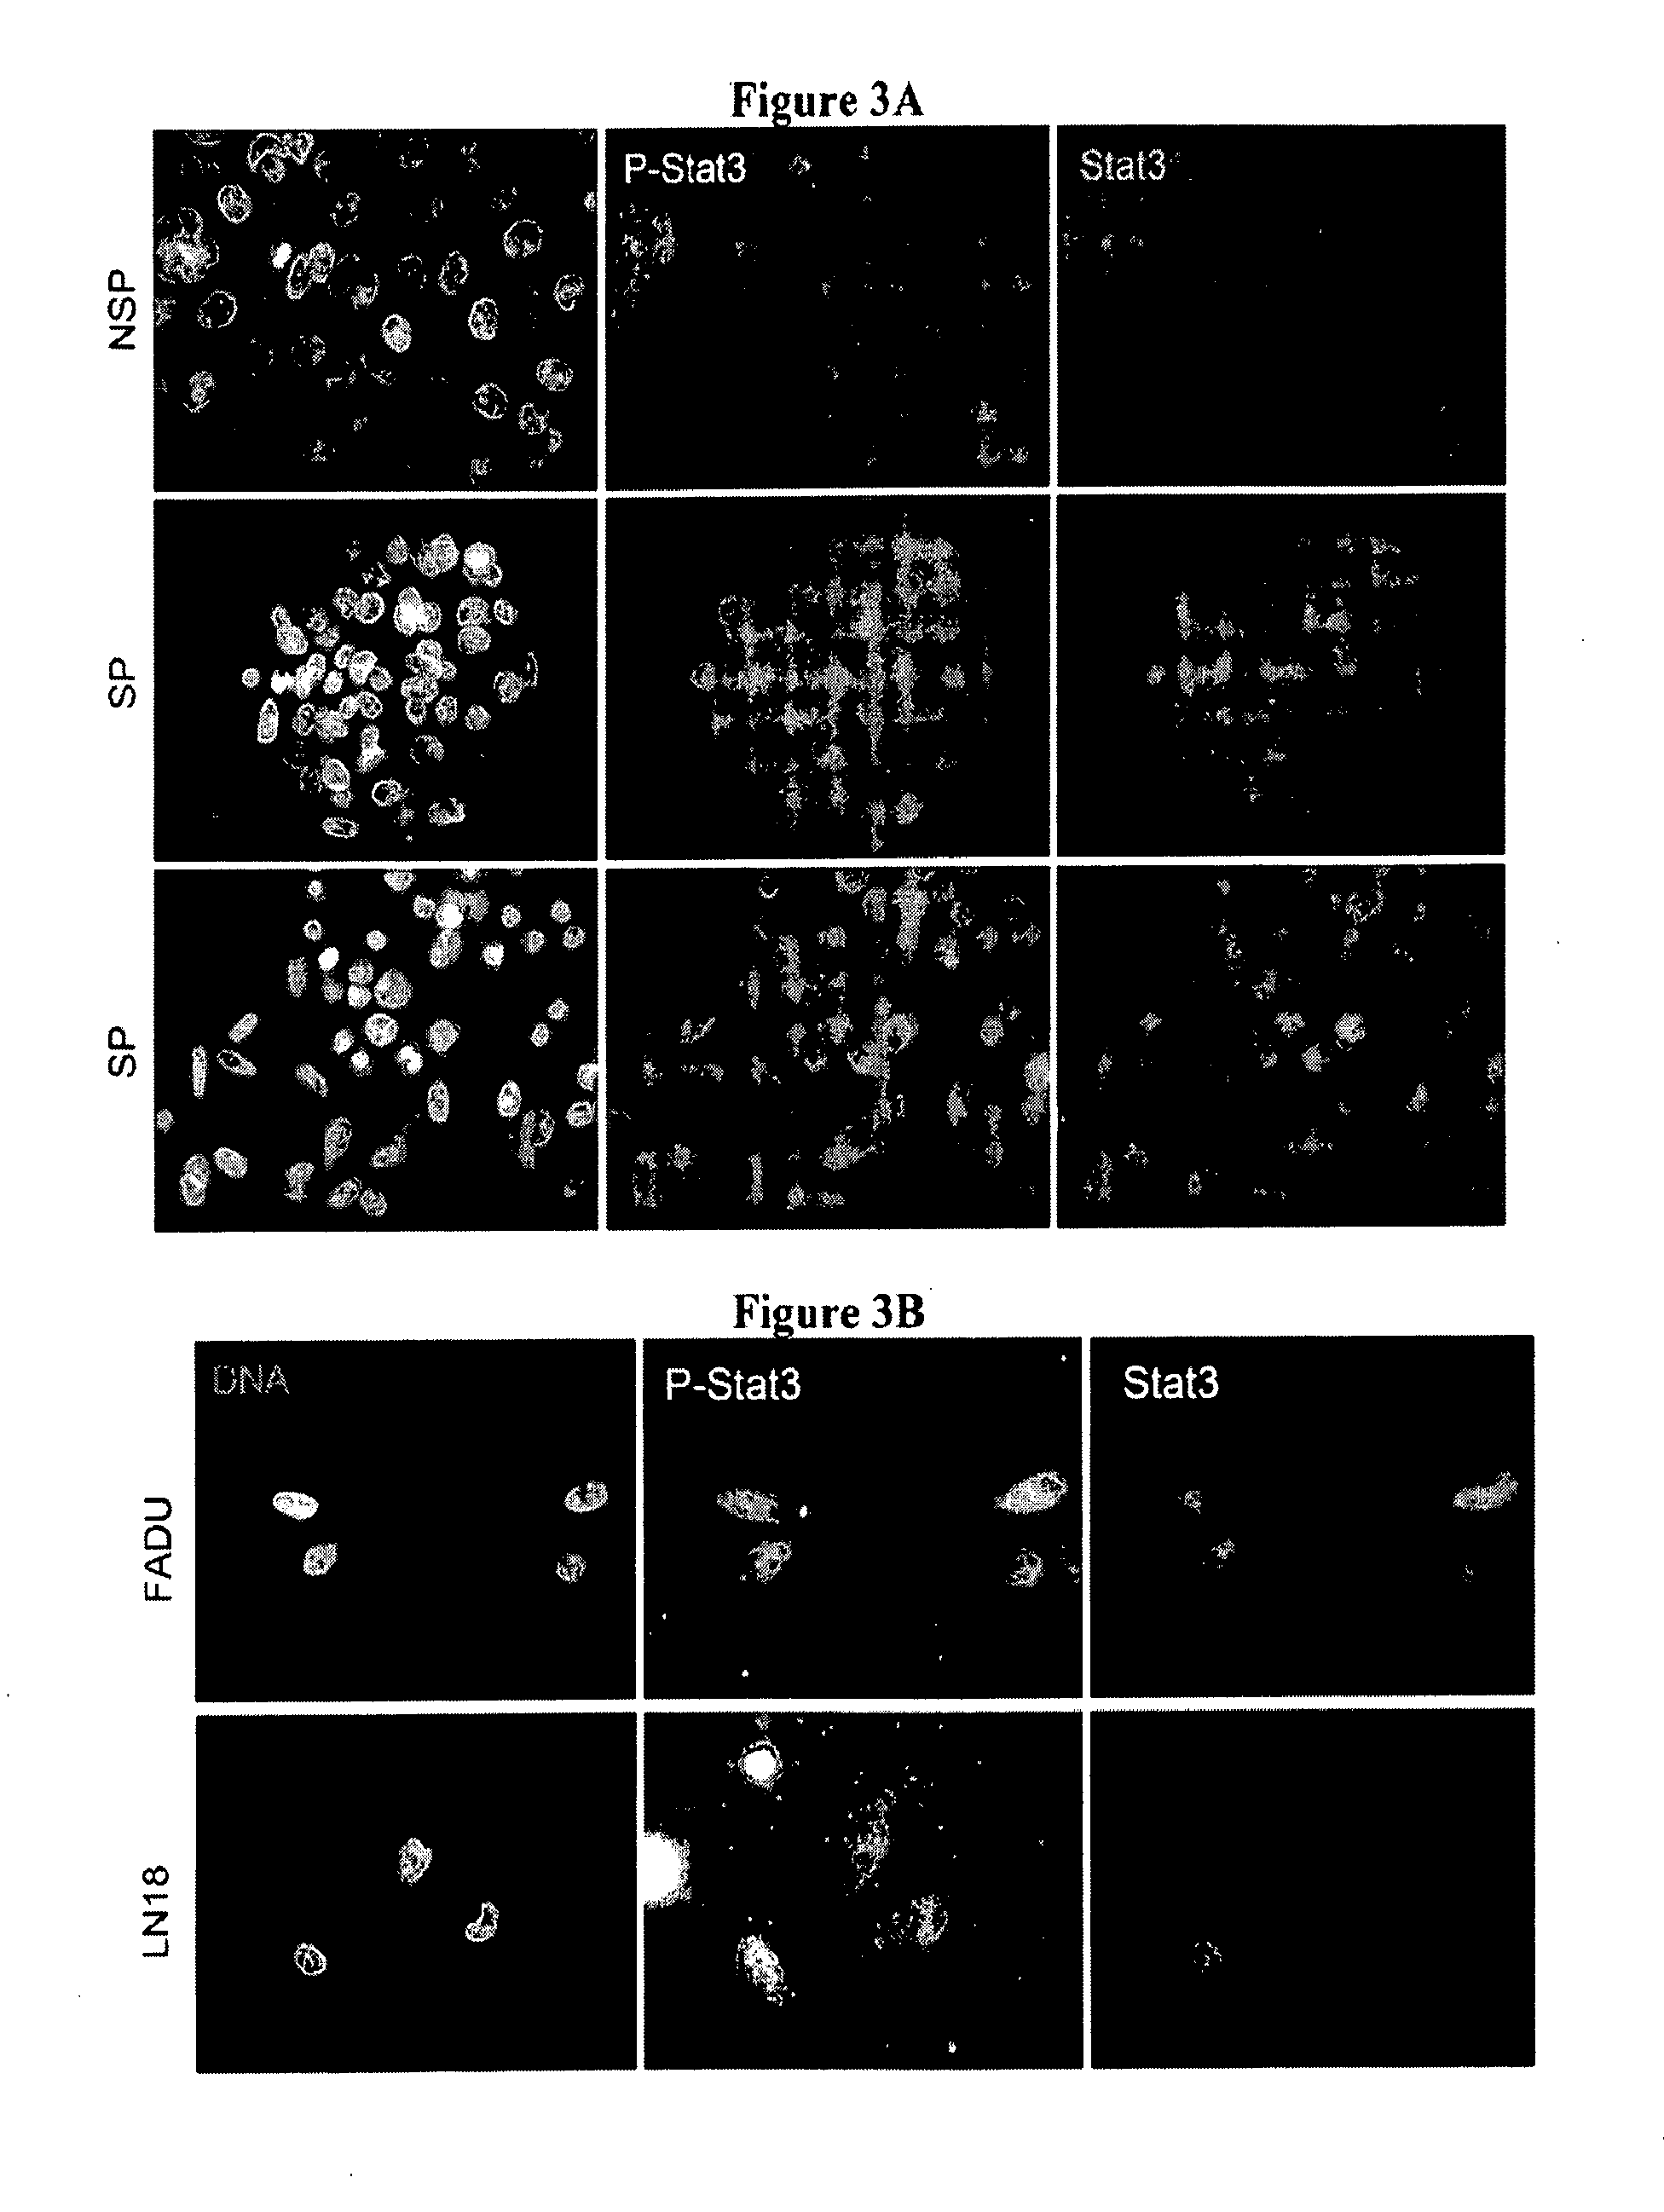 Novel compositions and methods for cancer treatment